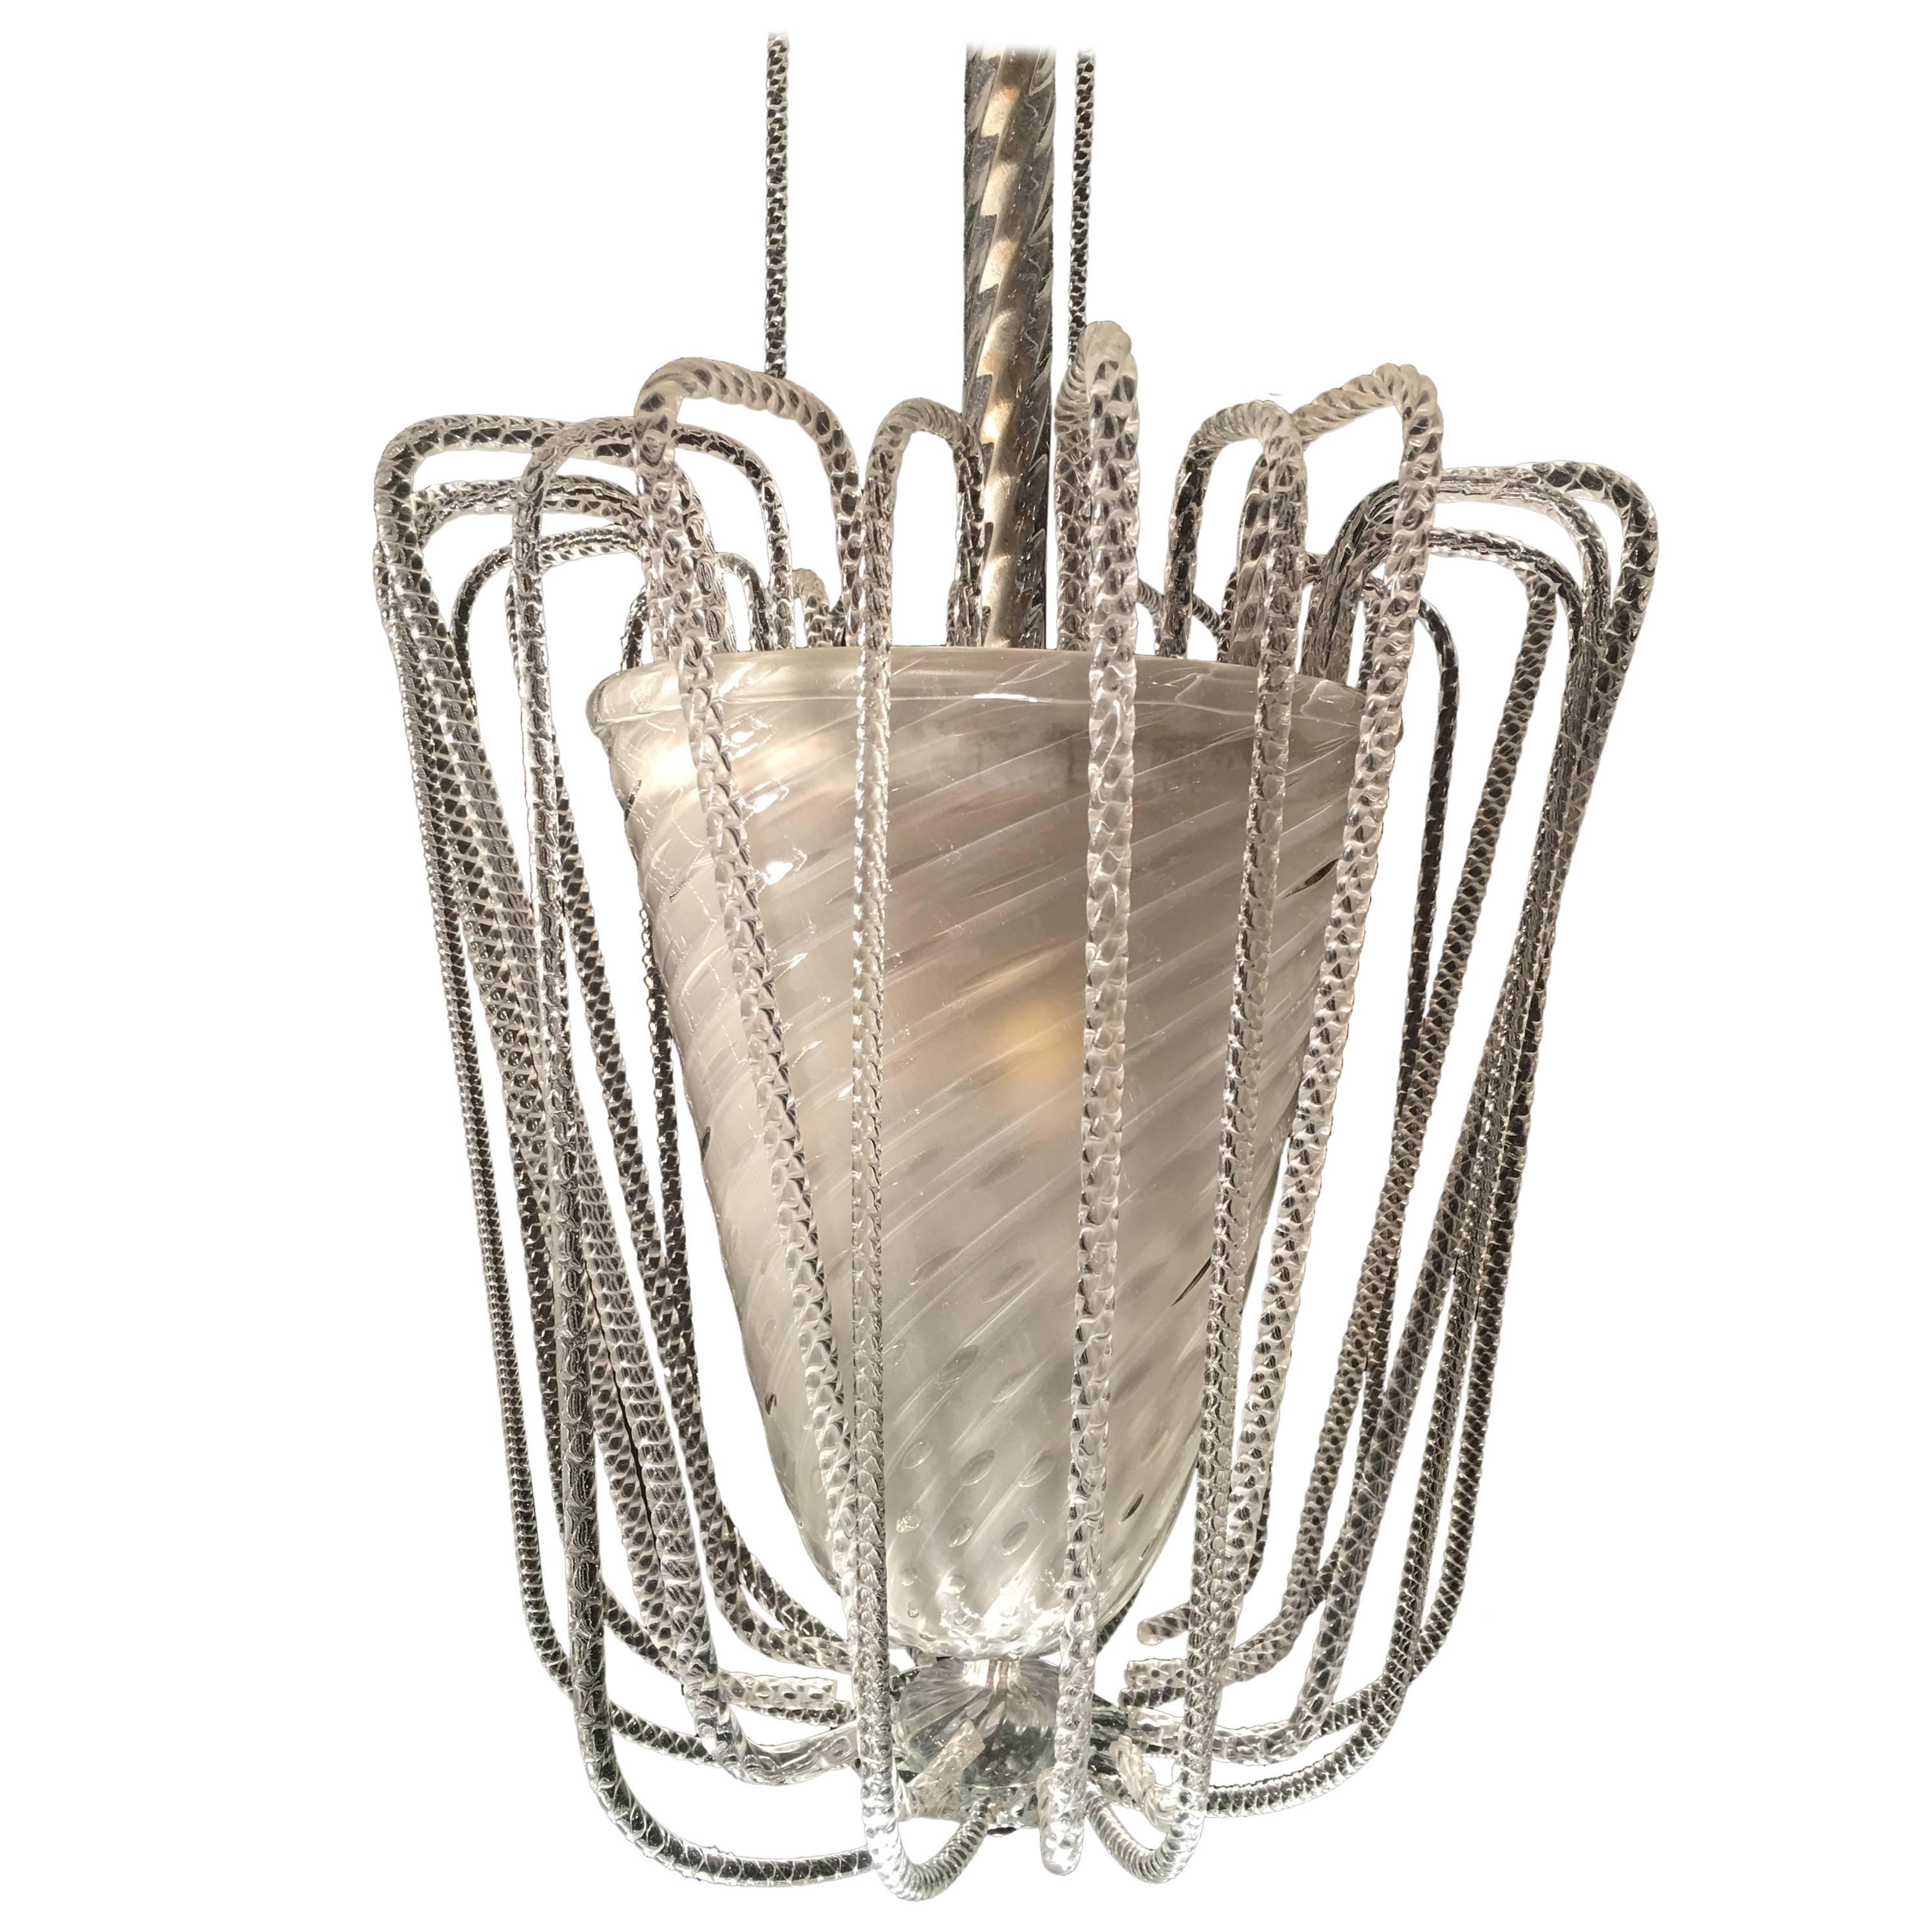 Charming Murano Chandelier by Barovier & Toso, 1940s